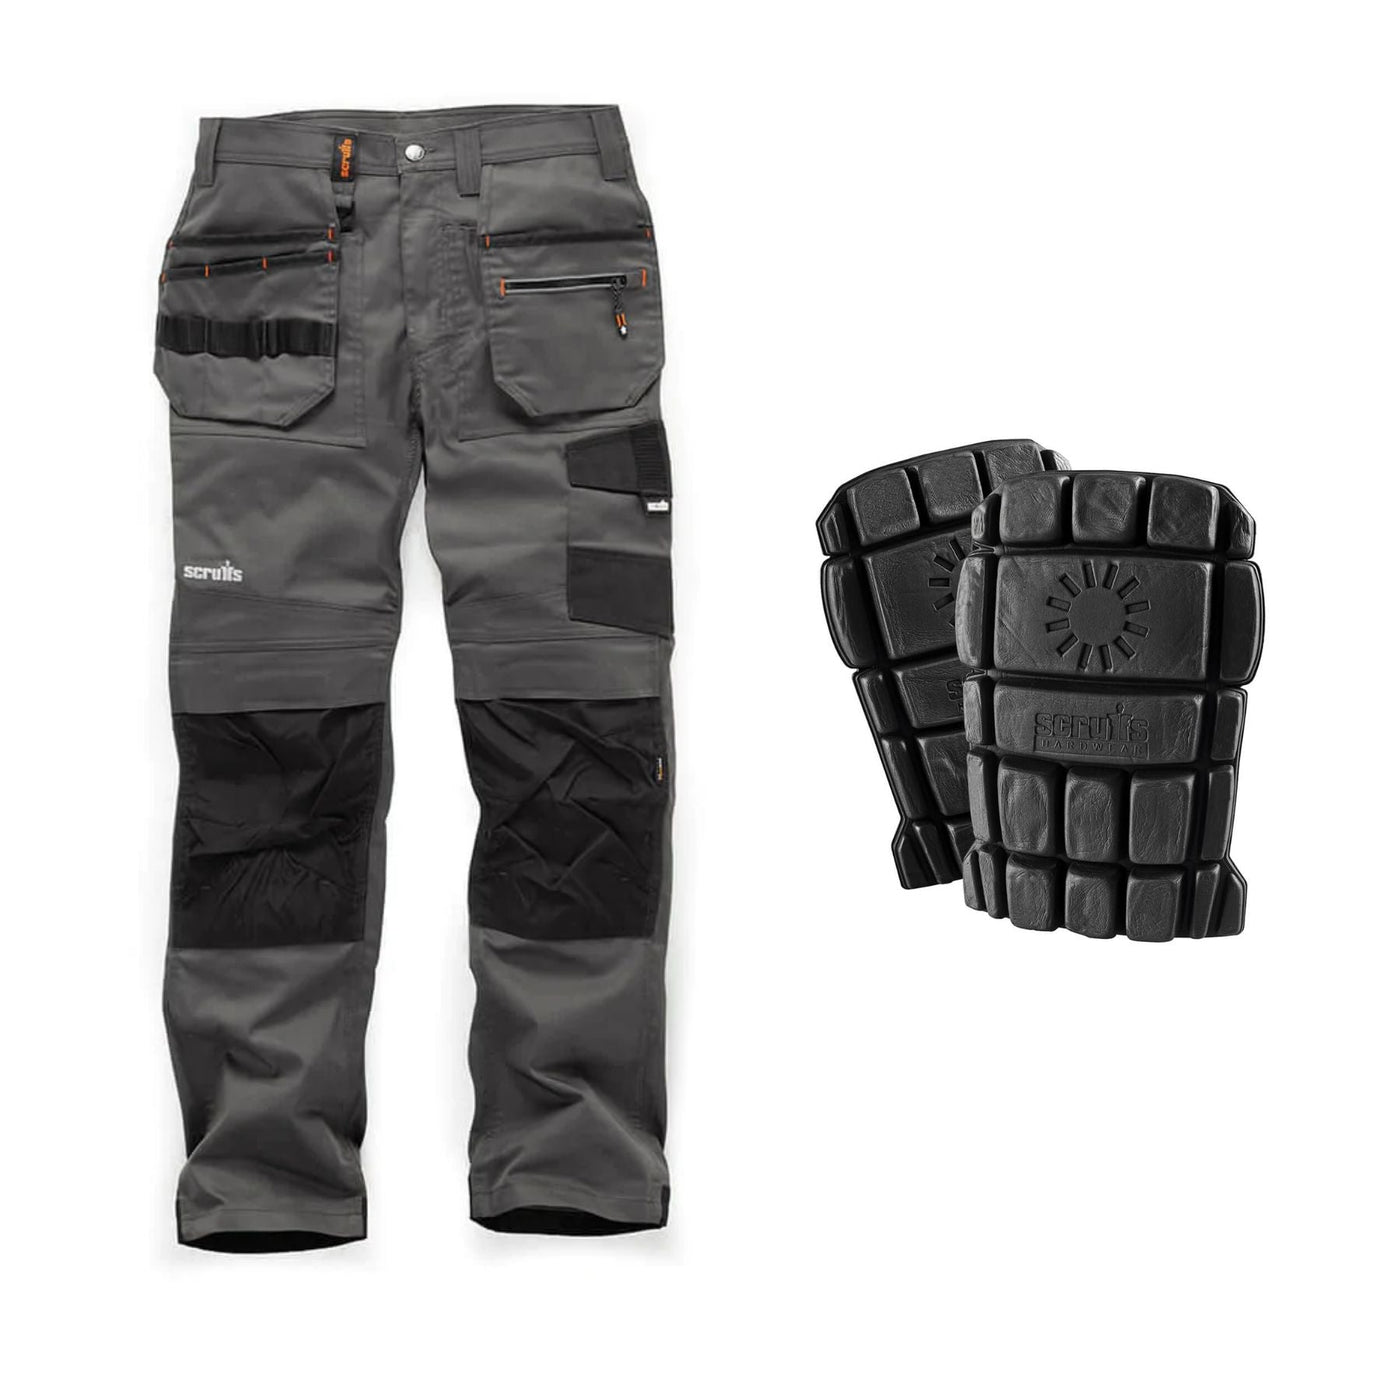 Scruffs Special Offer Pack - Trade Flex Work Trousers + Knee Pads